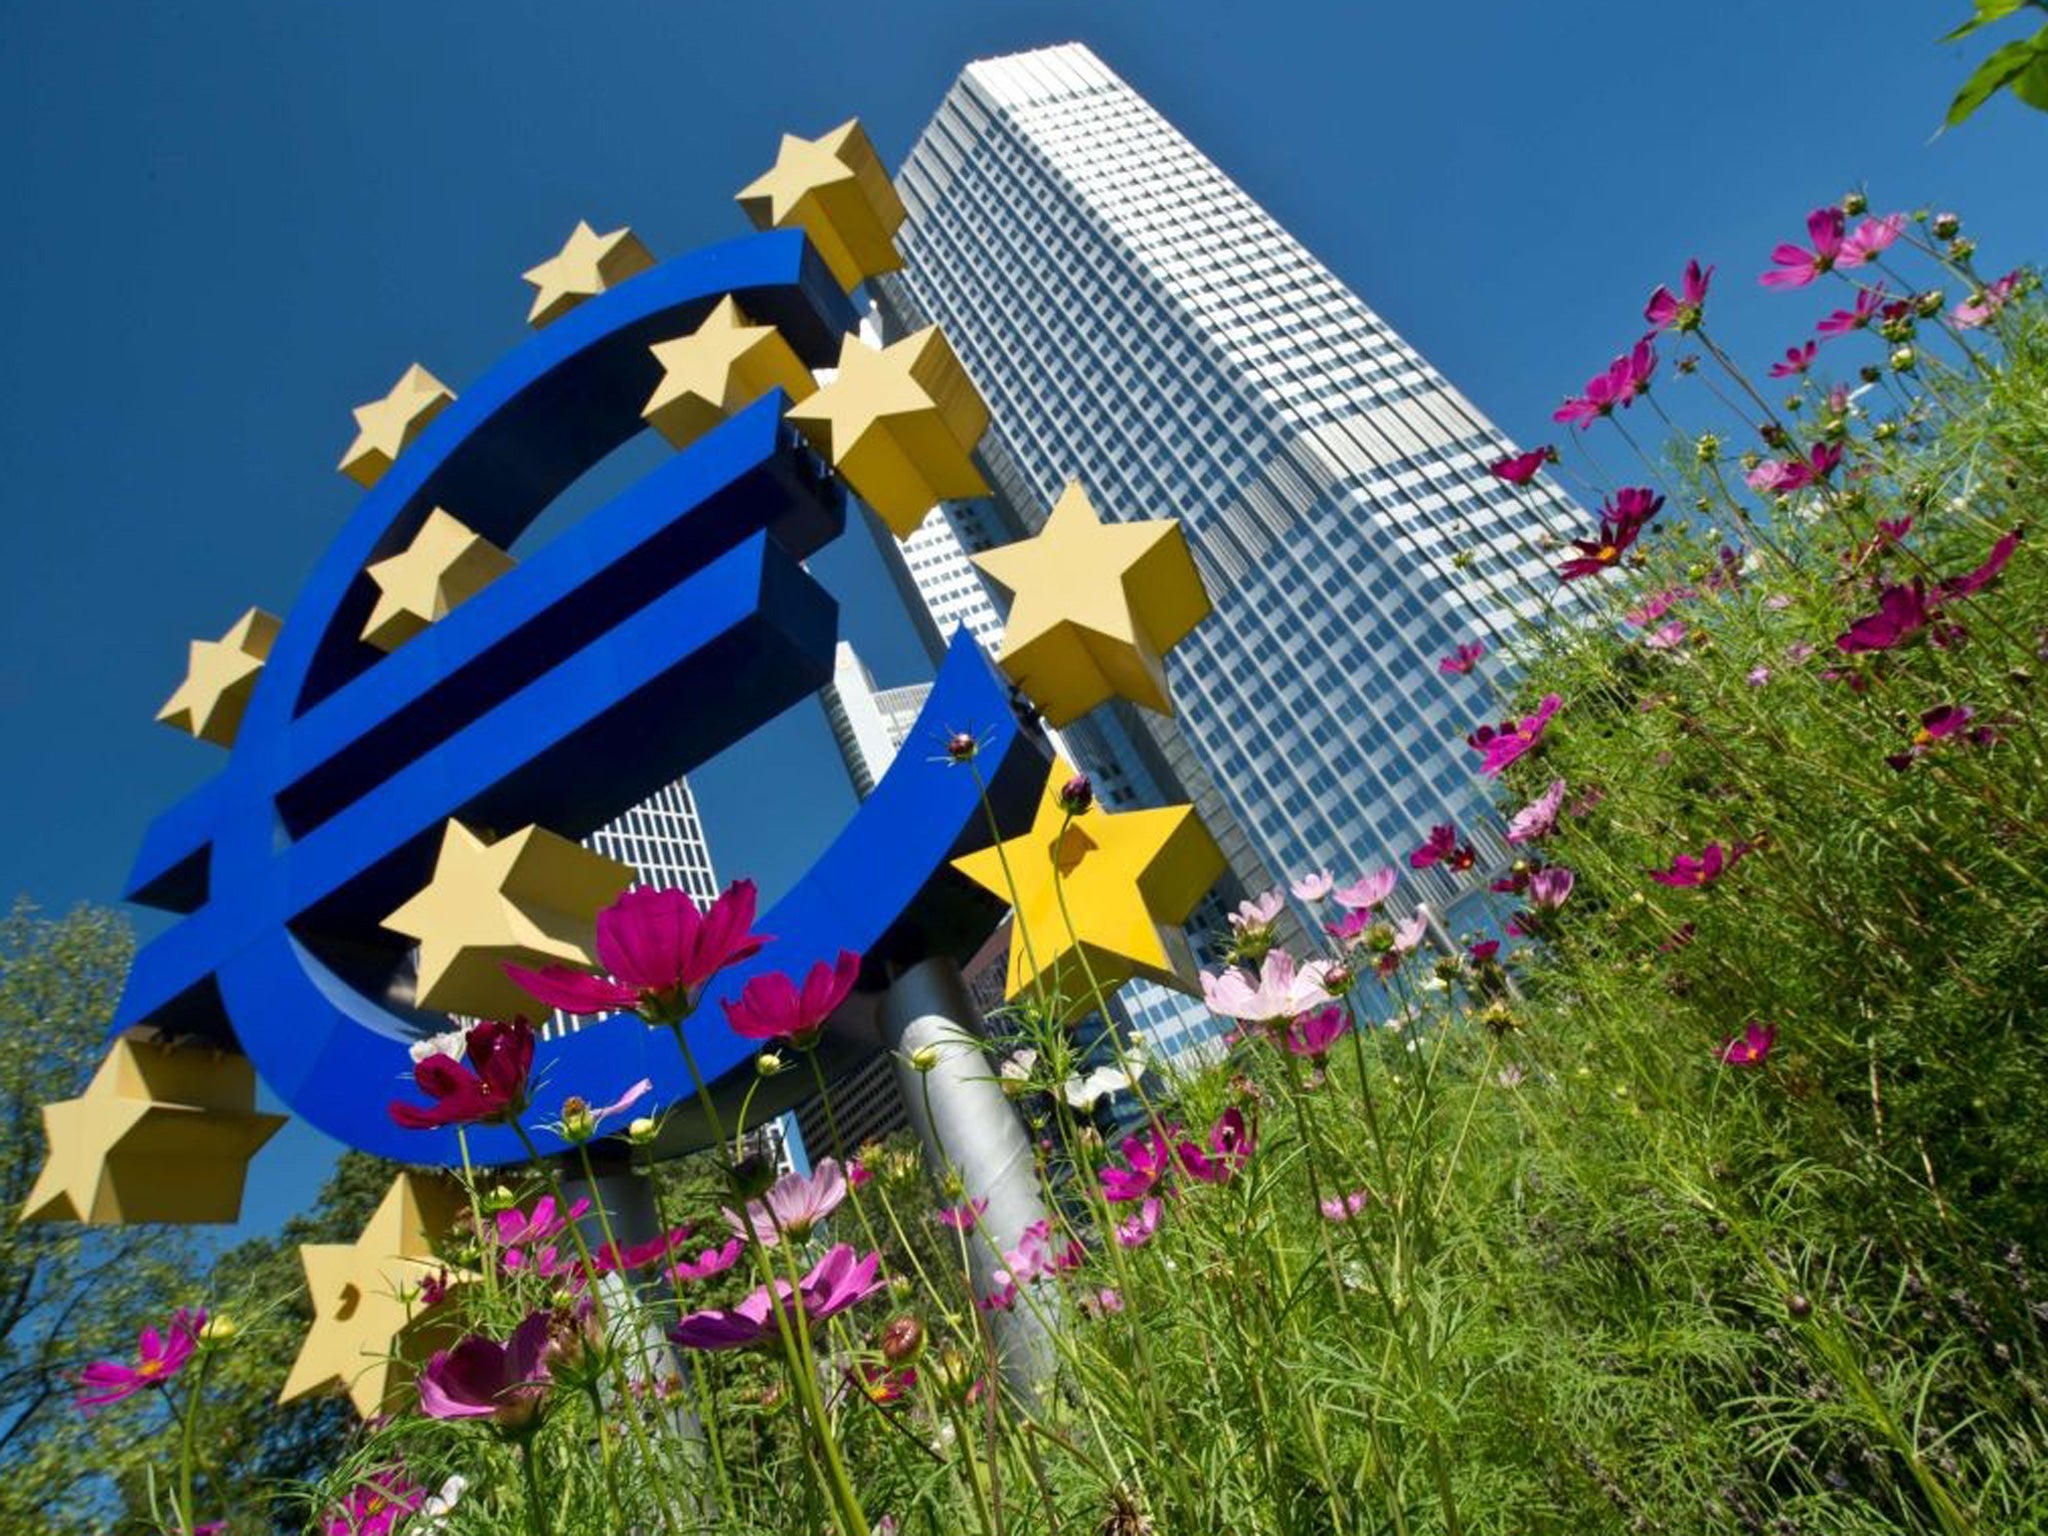 The European Central Bank is under pressure to launch quantitative easing